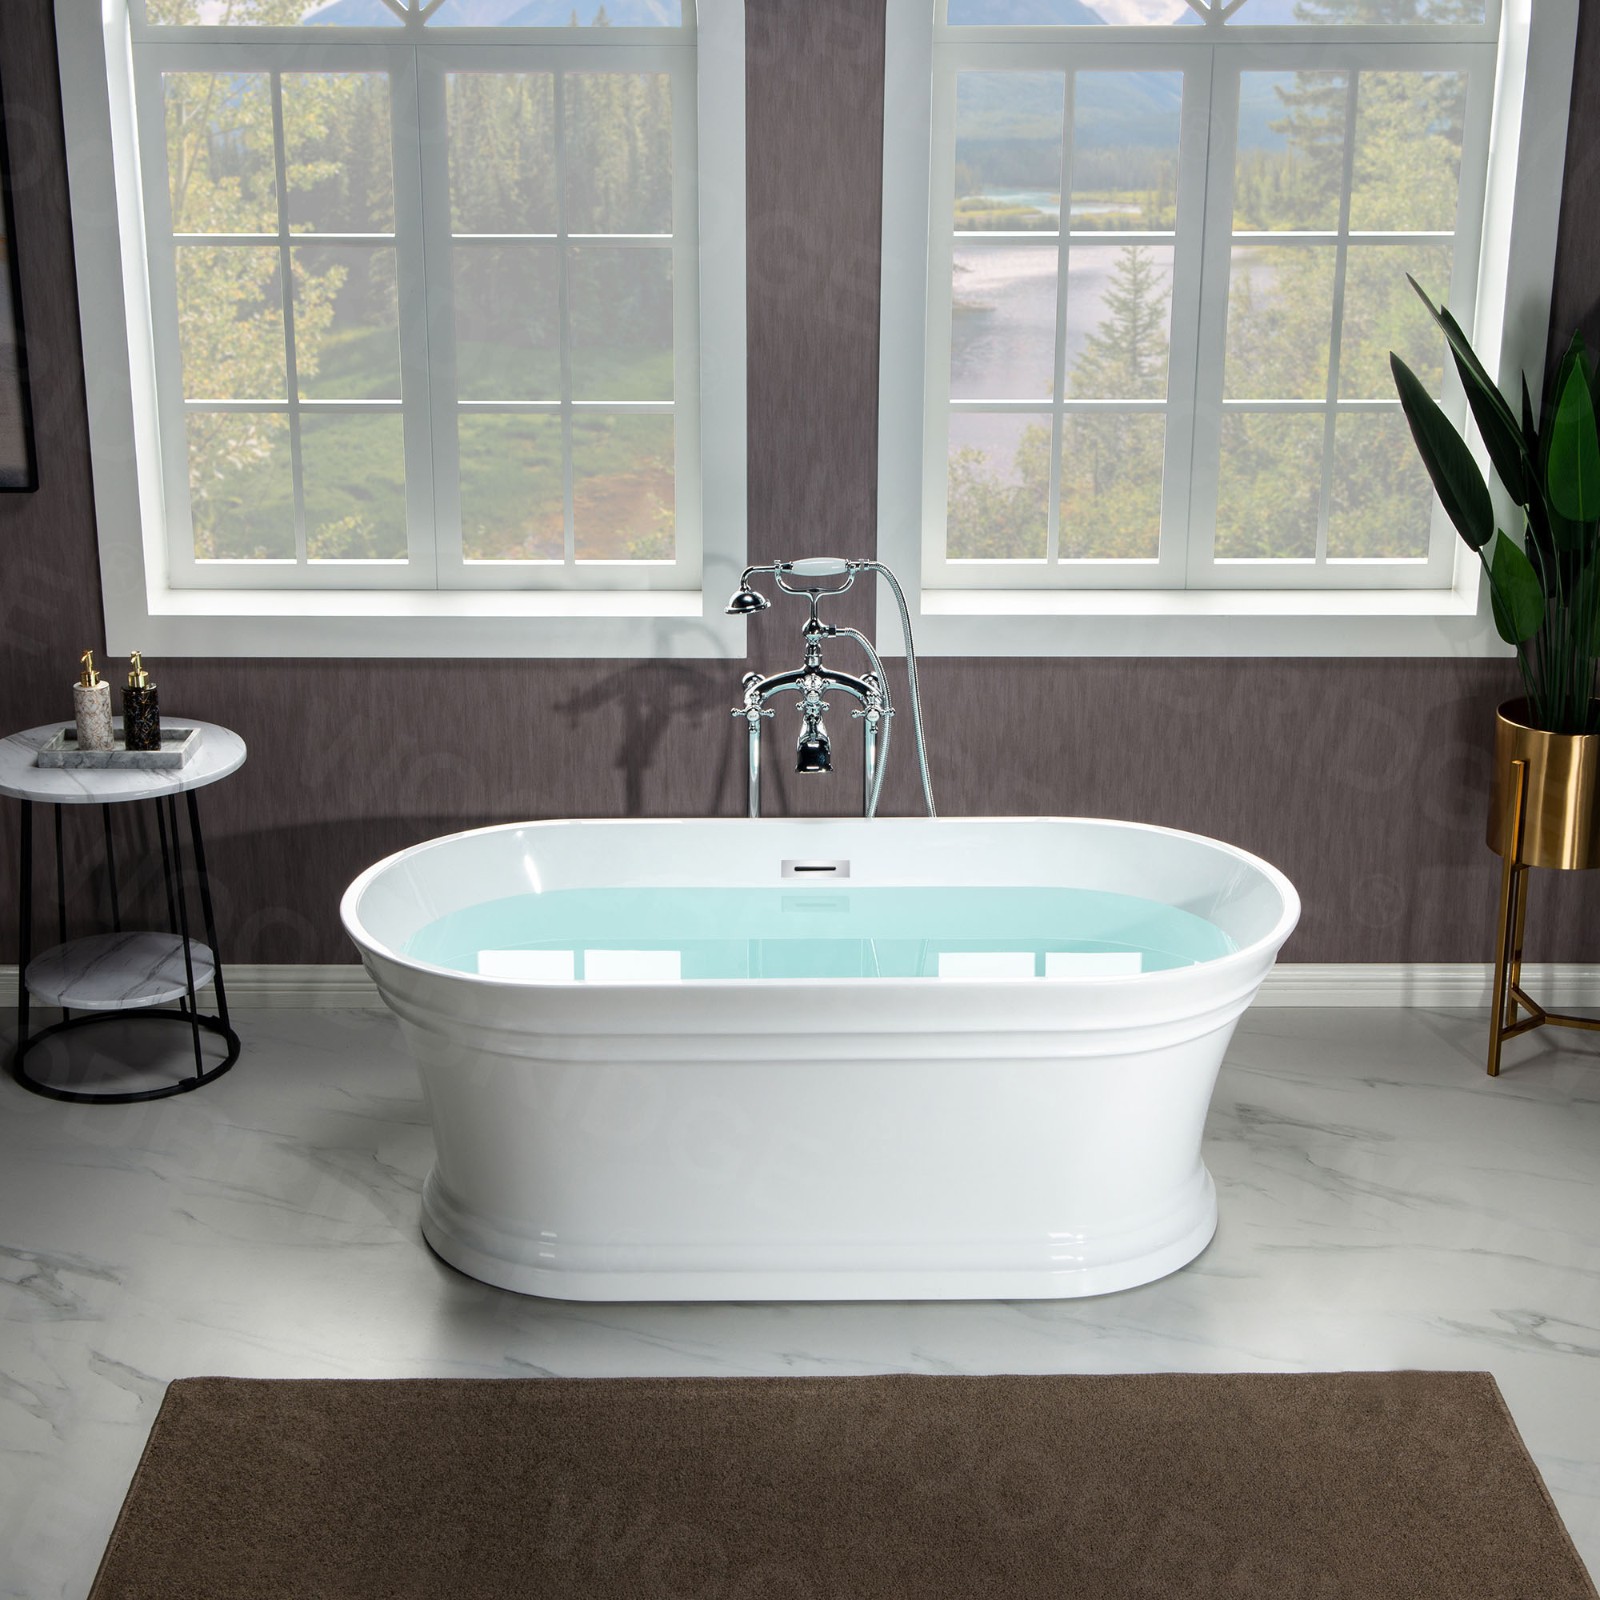  WOODBRIDGE 59 in. Freestanding Double Ended Acrylic Soaking Bathtub with Center Drain Assembly and Overflow, BTA1536/B1536, Glossy White_7833